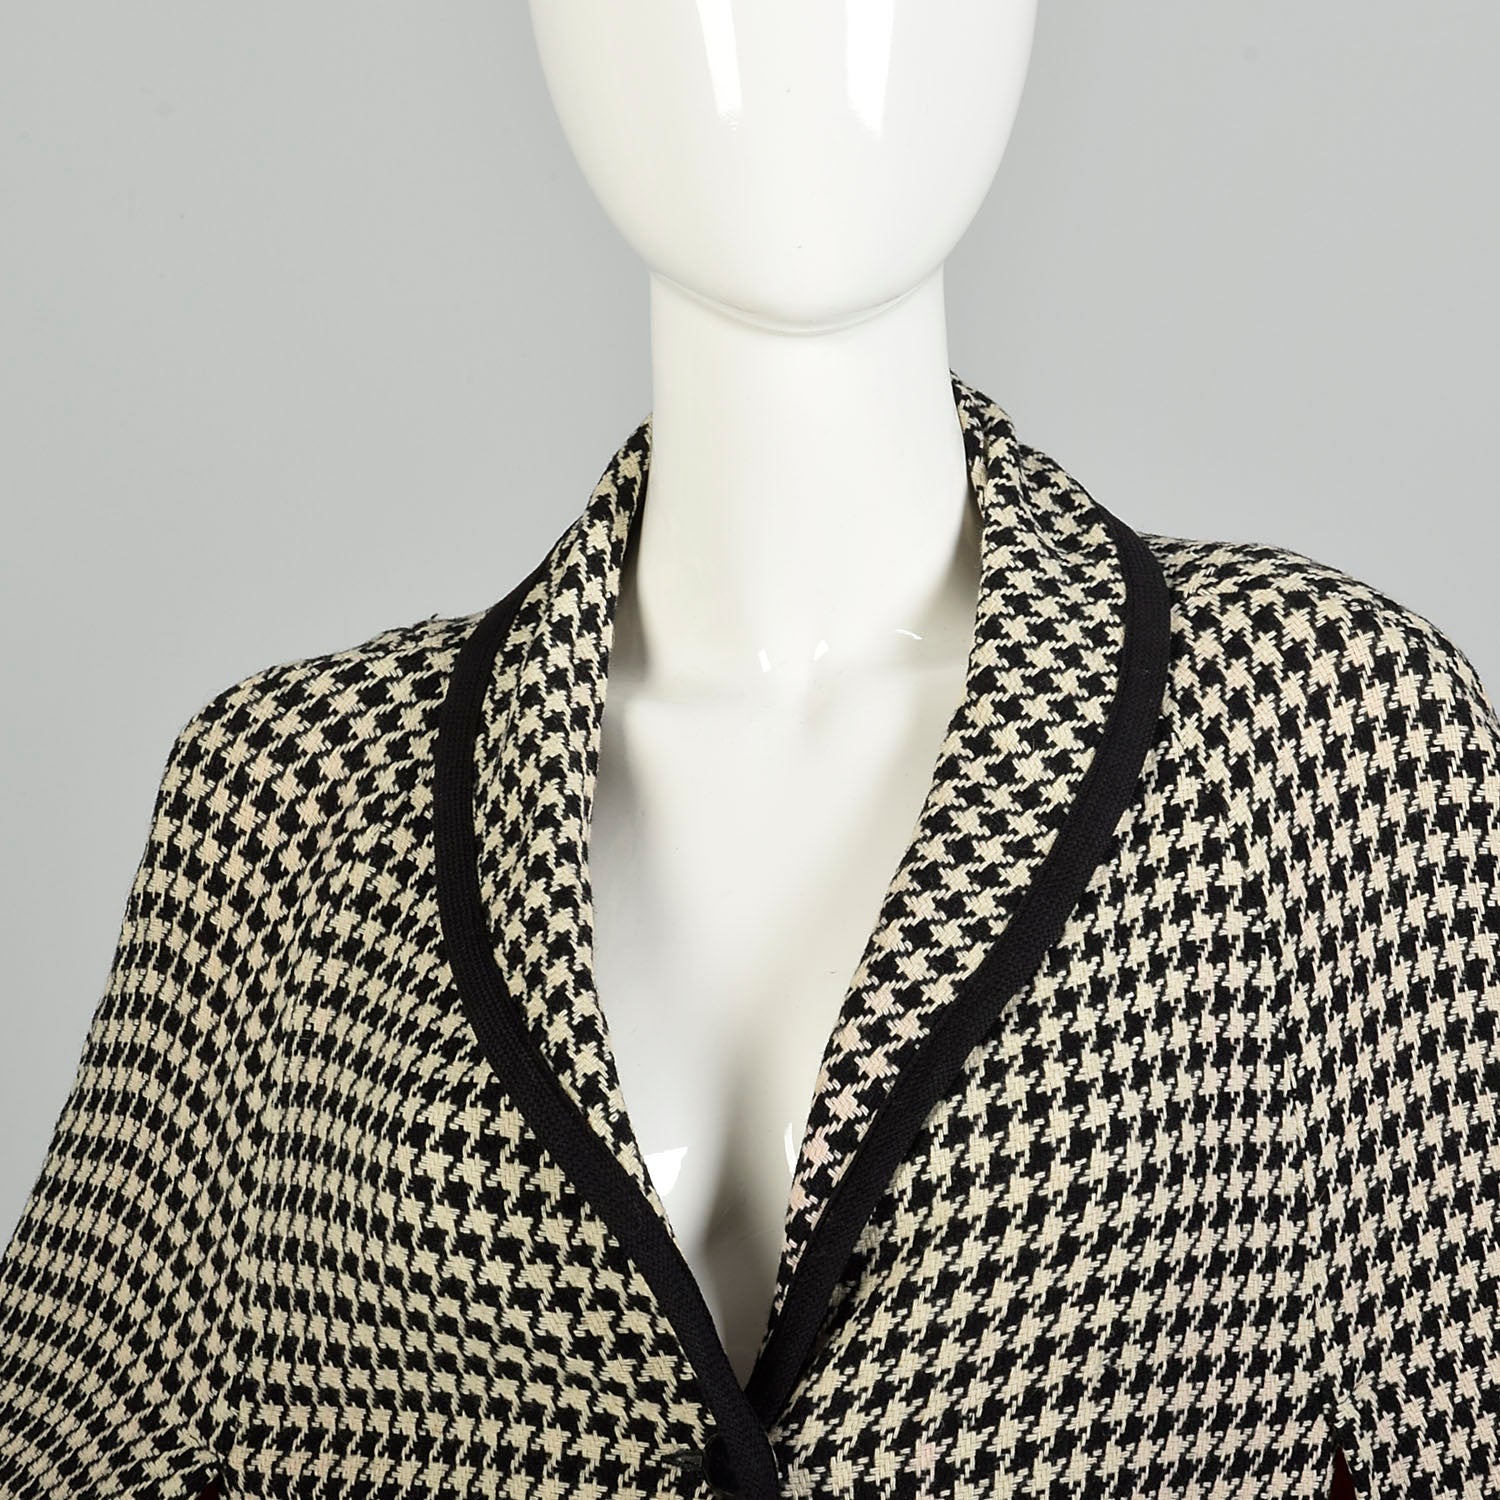 XXS 1960s Neusteters Houndstooth Cape Woven Winter Outerwear Shawl Collar Pockets